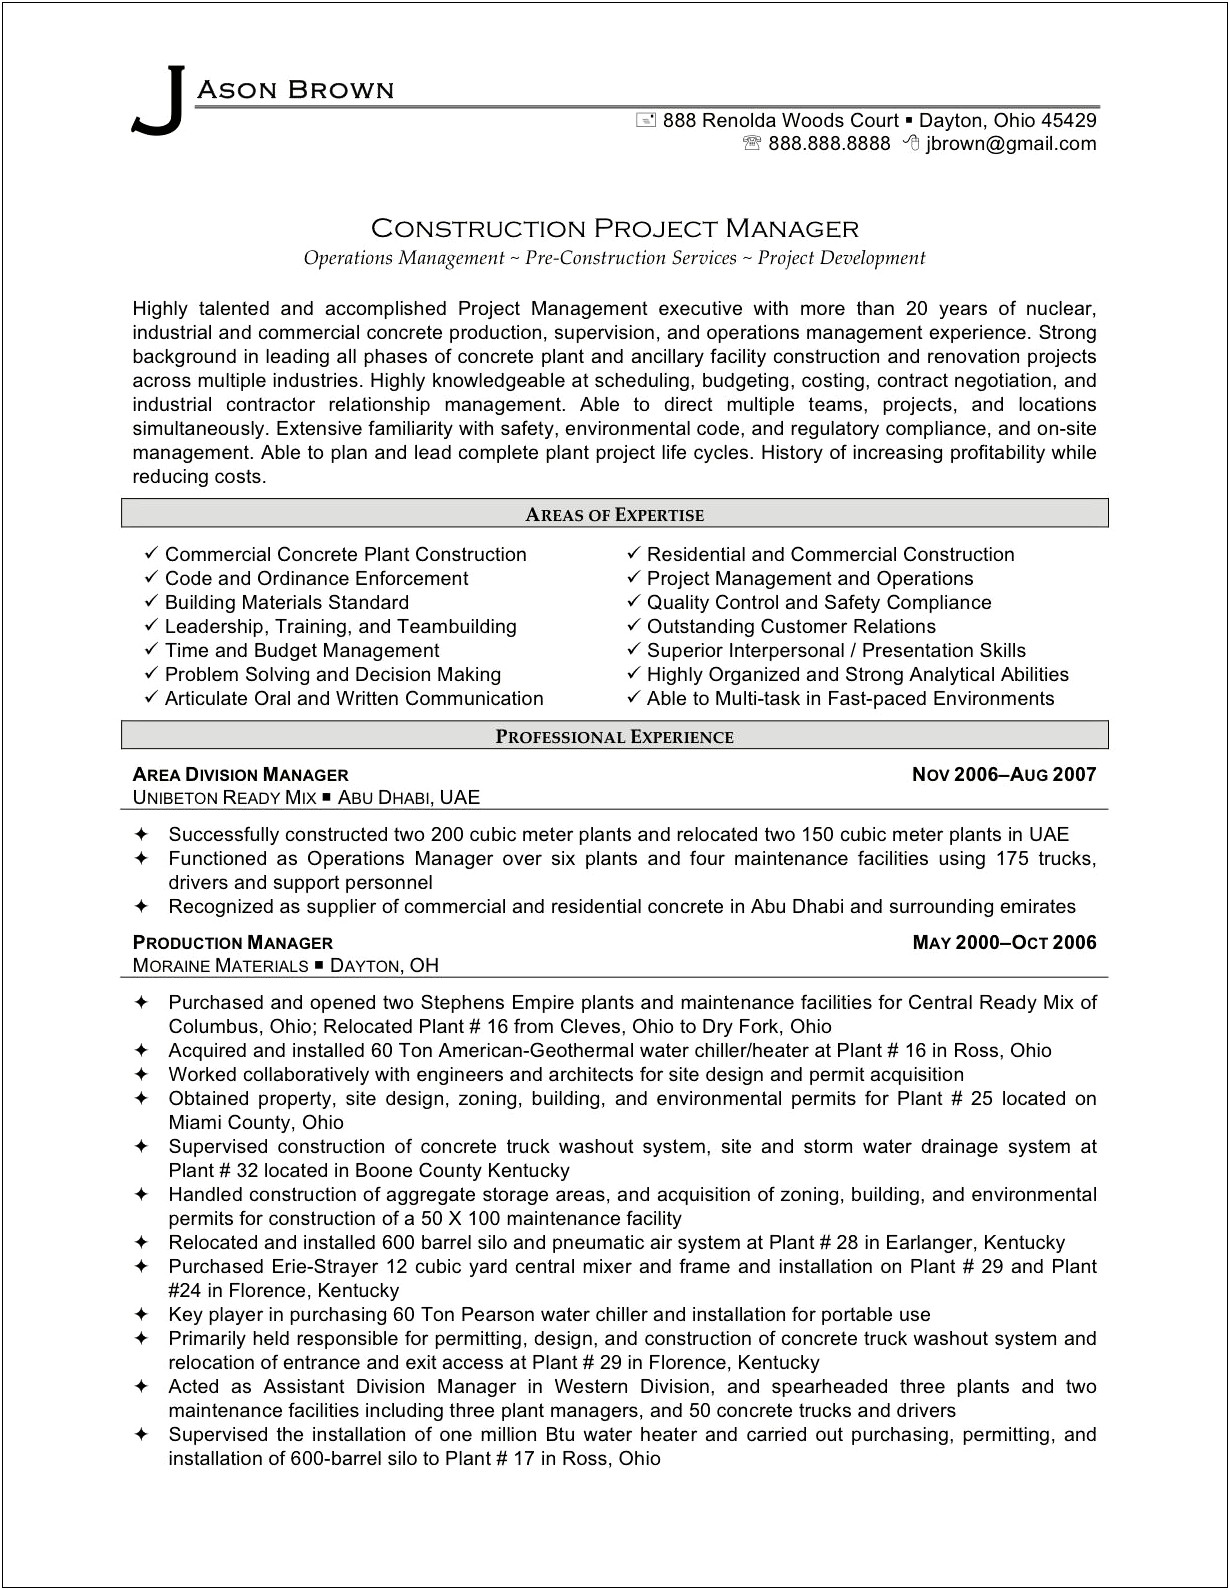 Resume Example Of Construction Worker